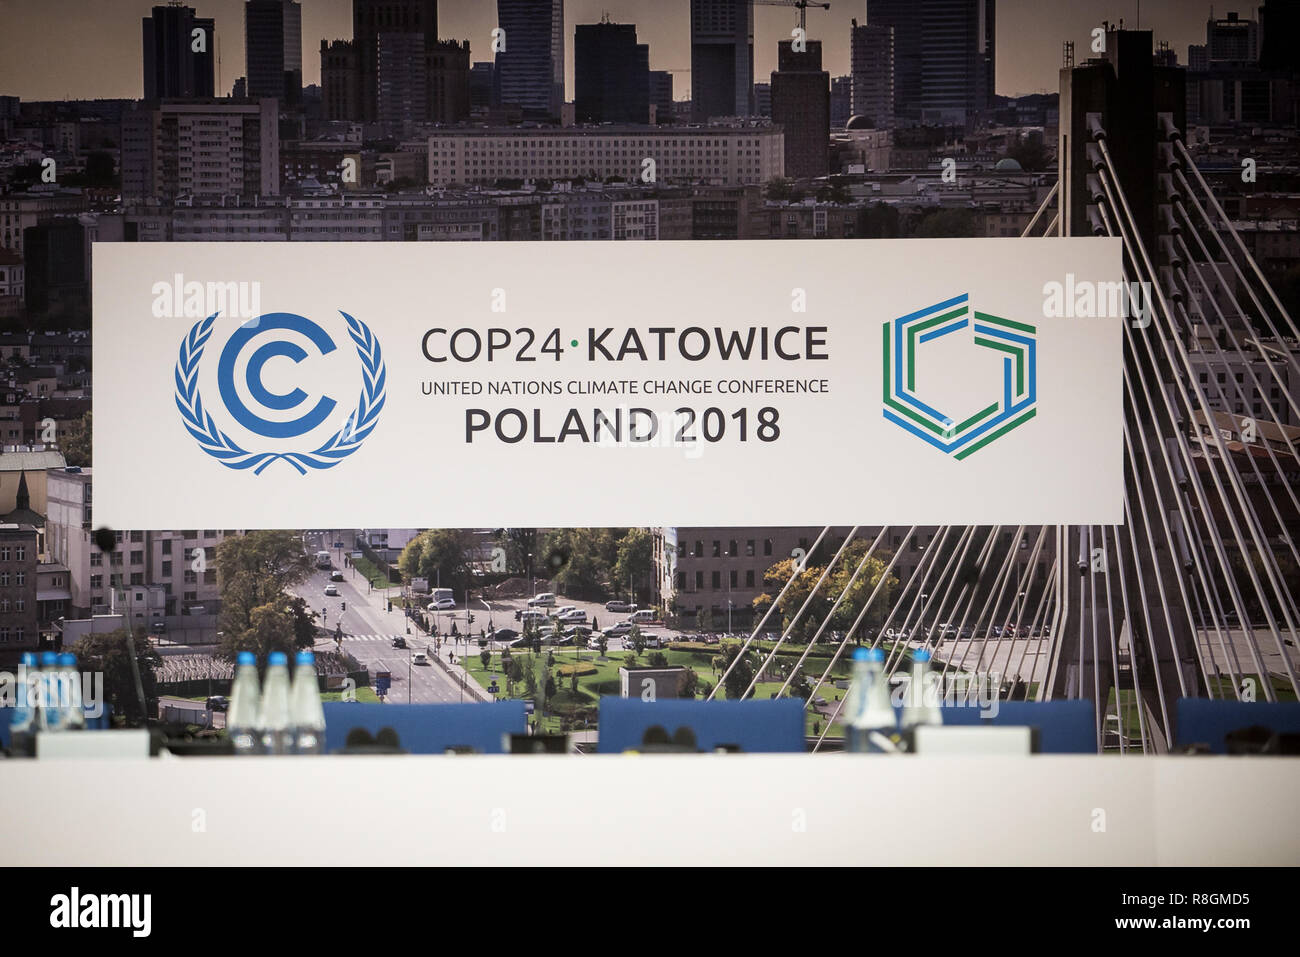 UN Climate Change Conference (COP24) in Katowice, Poland on 3 December 2018 Stock Photo